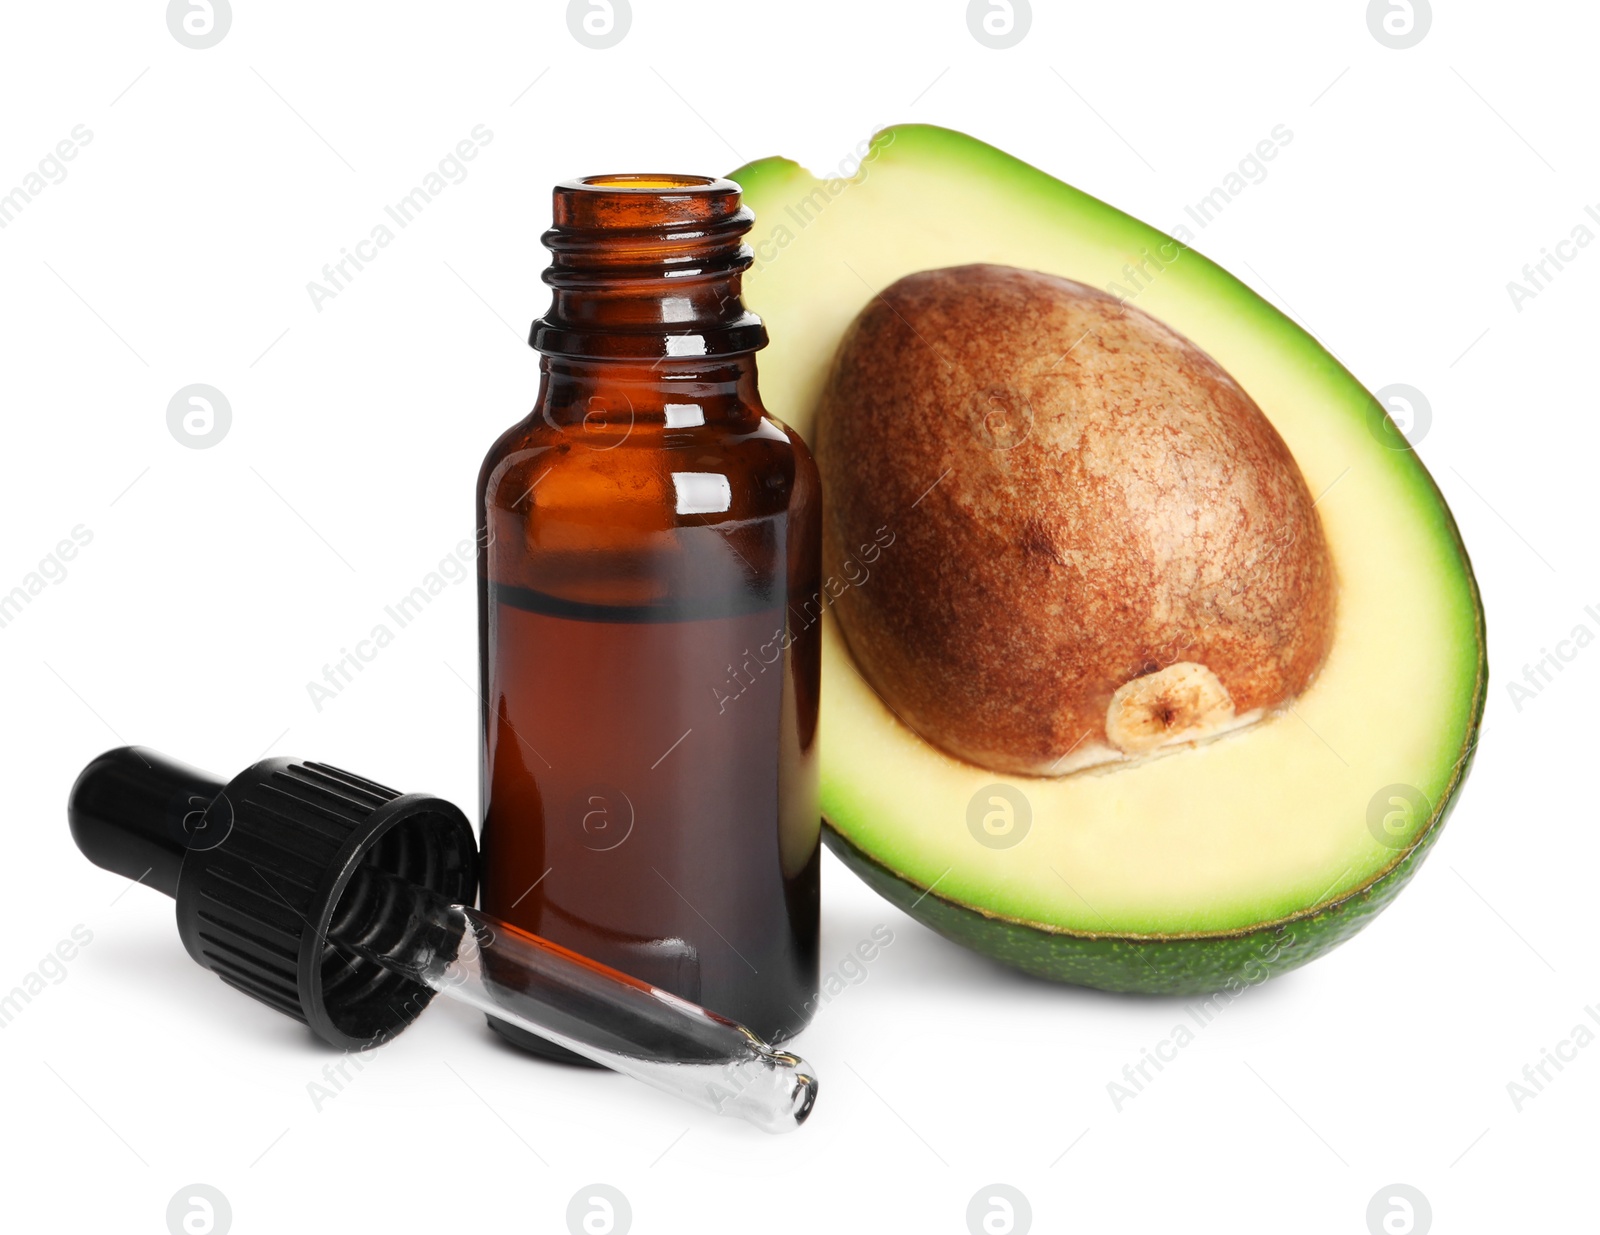 Photo of Cut avocado, bottle of essential oil and pipette on white background